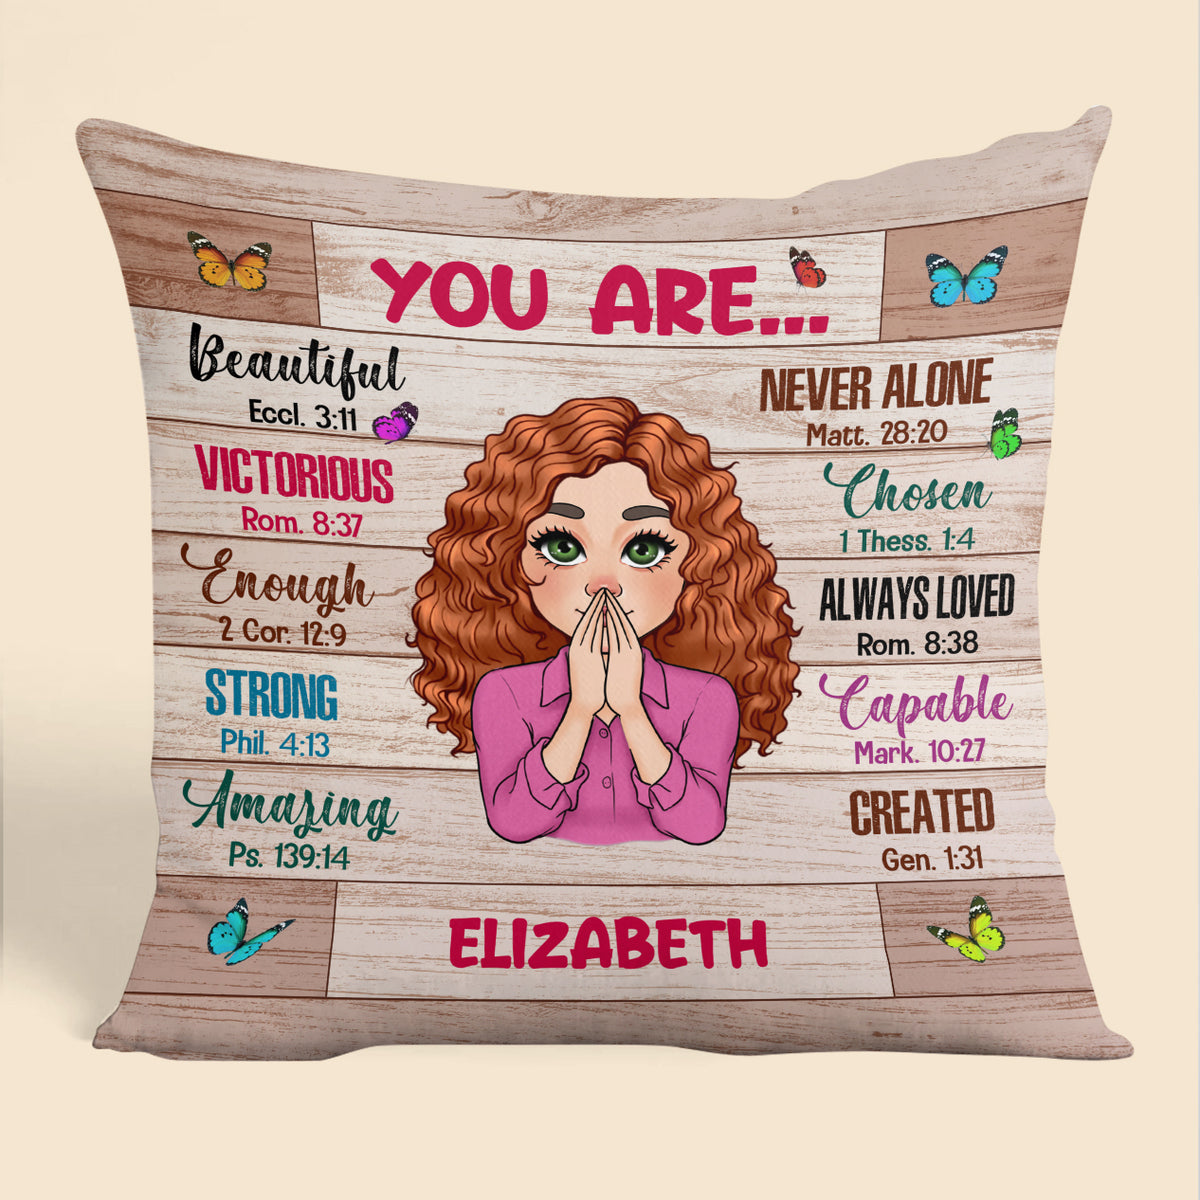 You Are Beautiful - Personalized Pillow - Best Gift For Mother, Daughter, Sister, Friend, Wife - Giftago